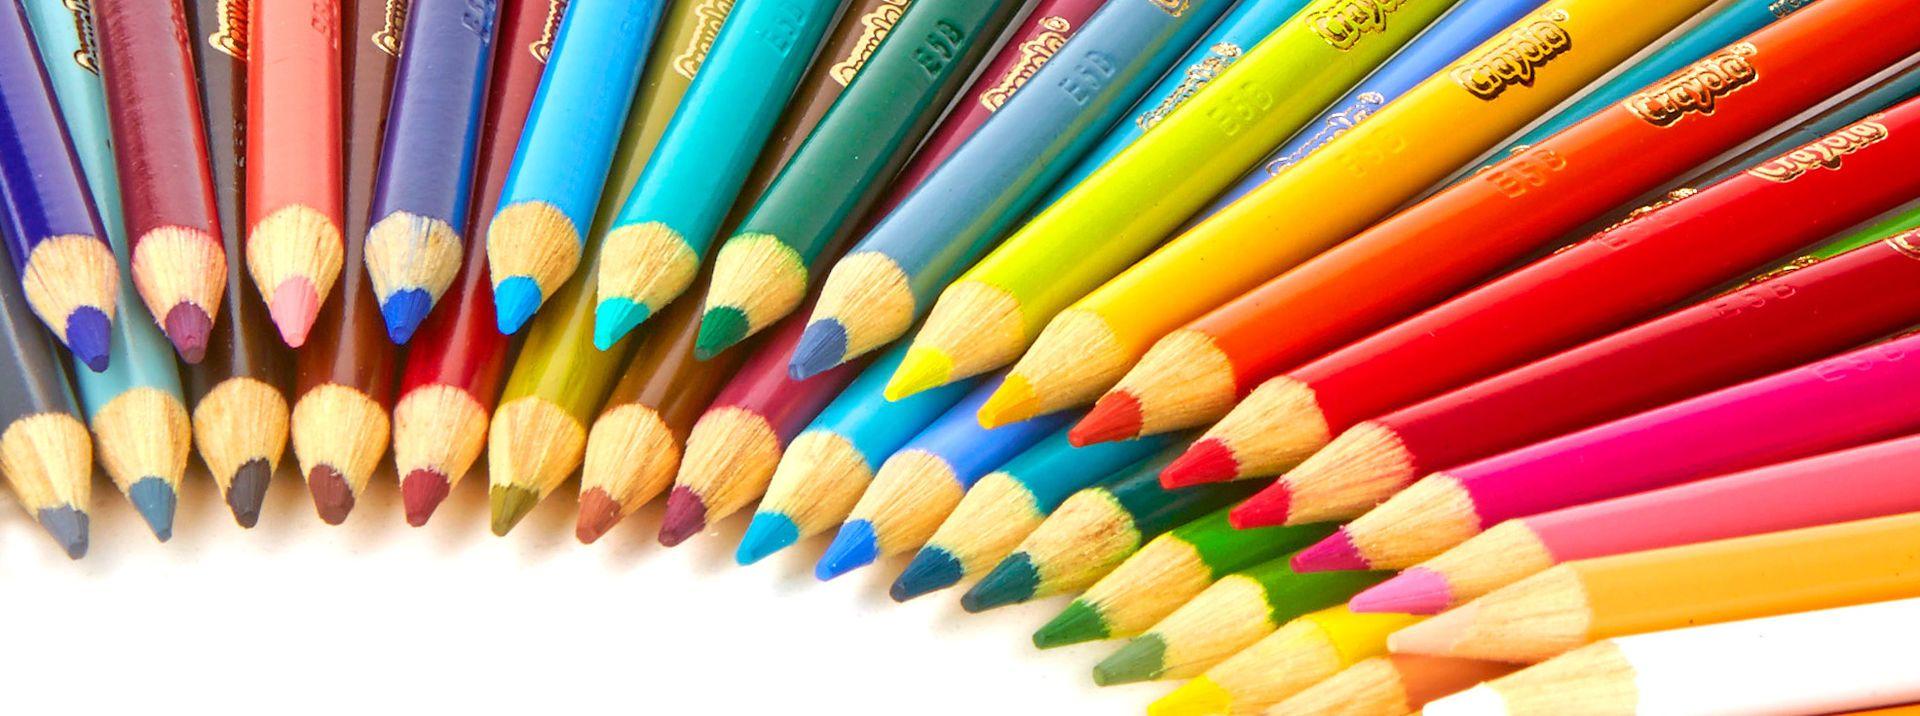 Pencils Image Colored HD Wallpaper And Background Photo Color